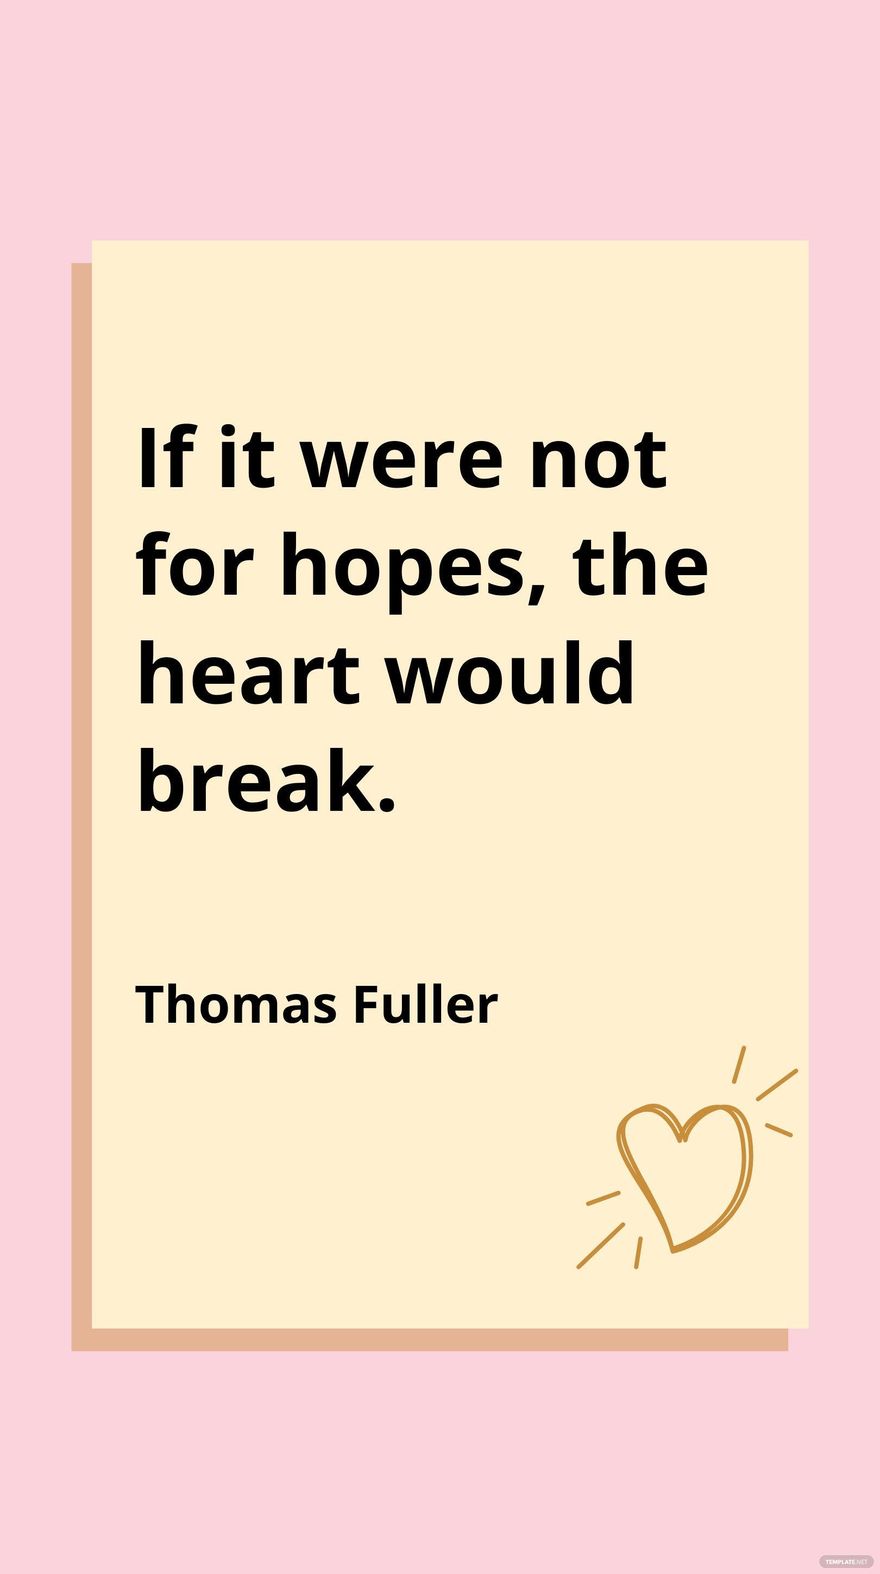 Thomas Fuller - If it were not for hopes, the heart would break.